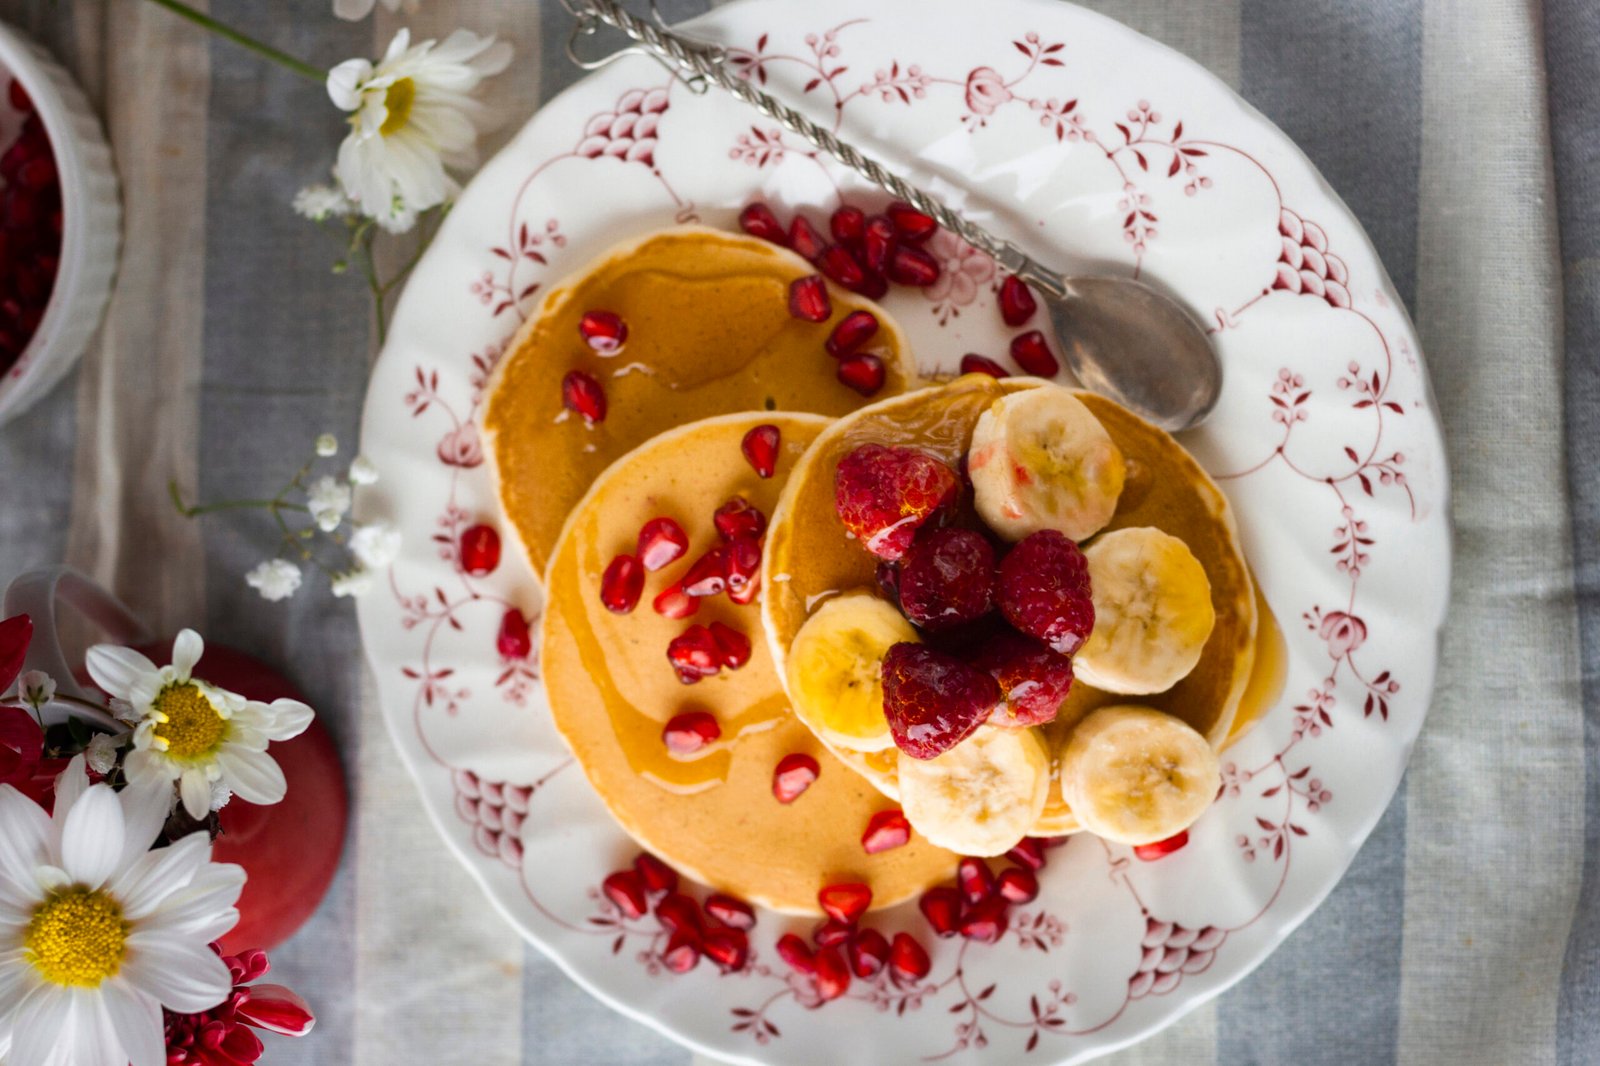 Floral plate with pancakes with pomegranate seeds, bananas and raspberries.